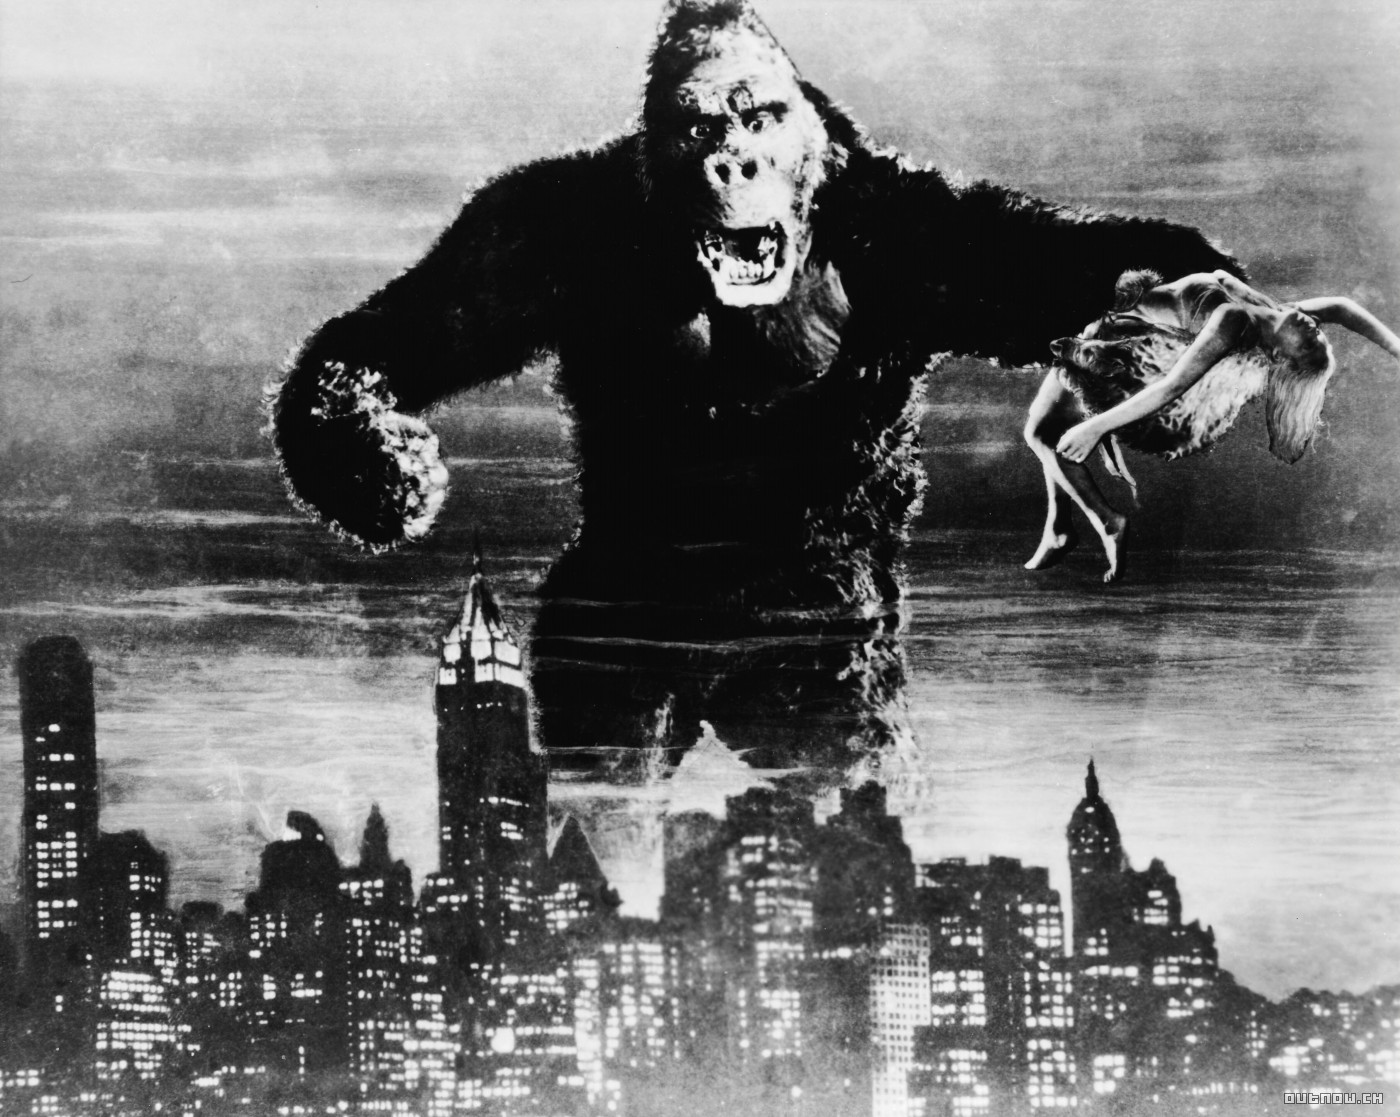 King Kong (1933) Backgrounds, Compatible - PC, Mobile, Gadgets| 1400x1117 px